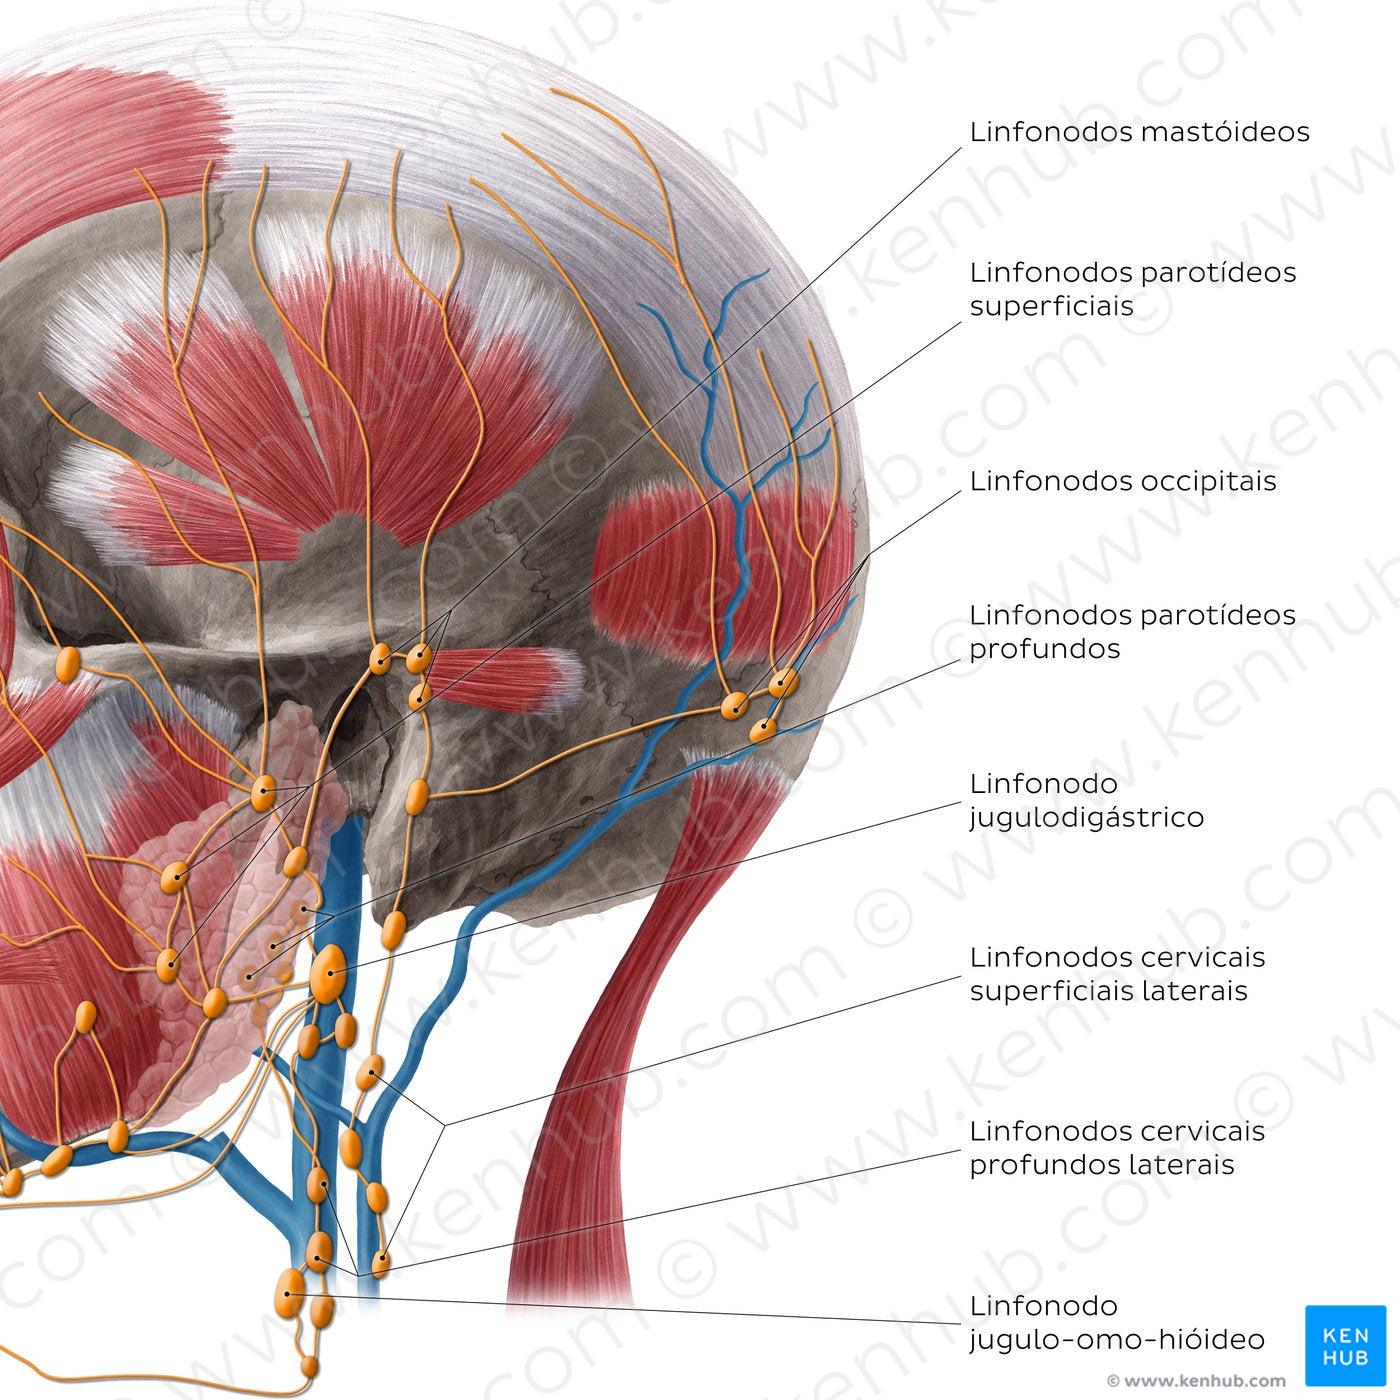 Lymphatics of the neck (Lateral) (Portuguese)